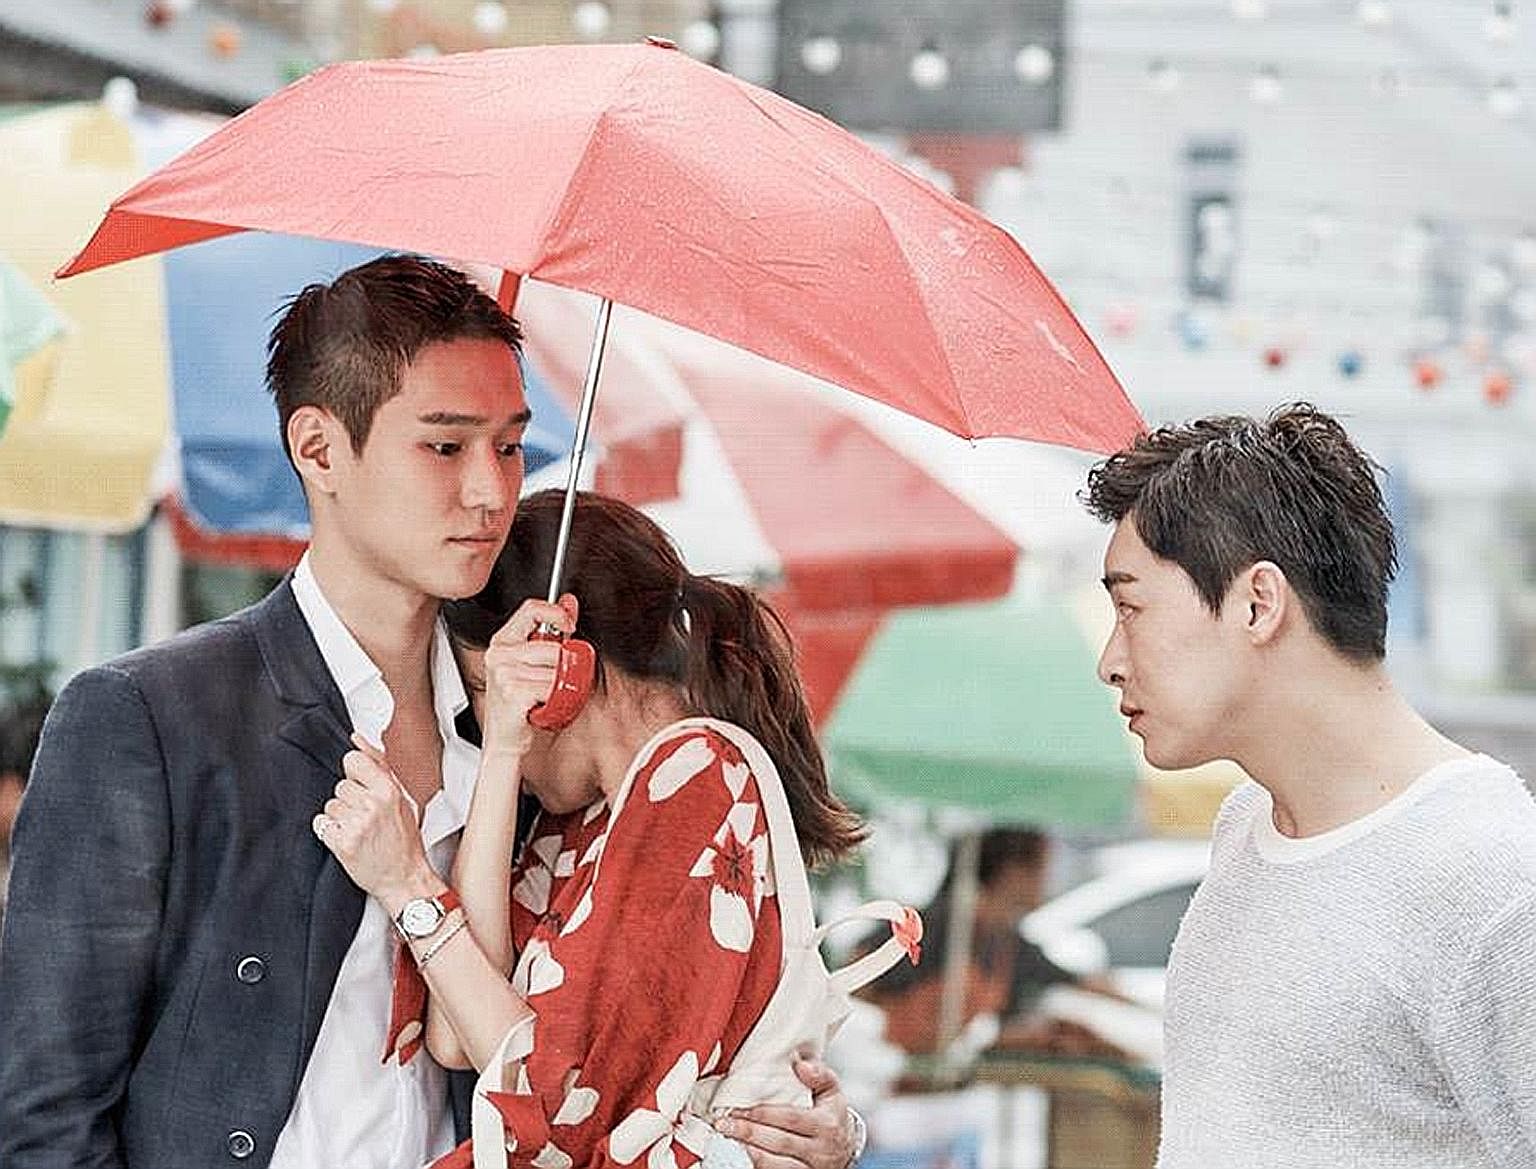 Fashion tycoon Go Jung Won (far left, played by Ko Kyoung Pyo) and his best friend Lee Hwa Shin (right, Cho Jung Seok) are in love with weathergirl Pyo Na Ri (centre, Kong Hyo Jin) in Jealousy Incarnate.